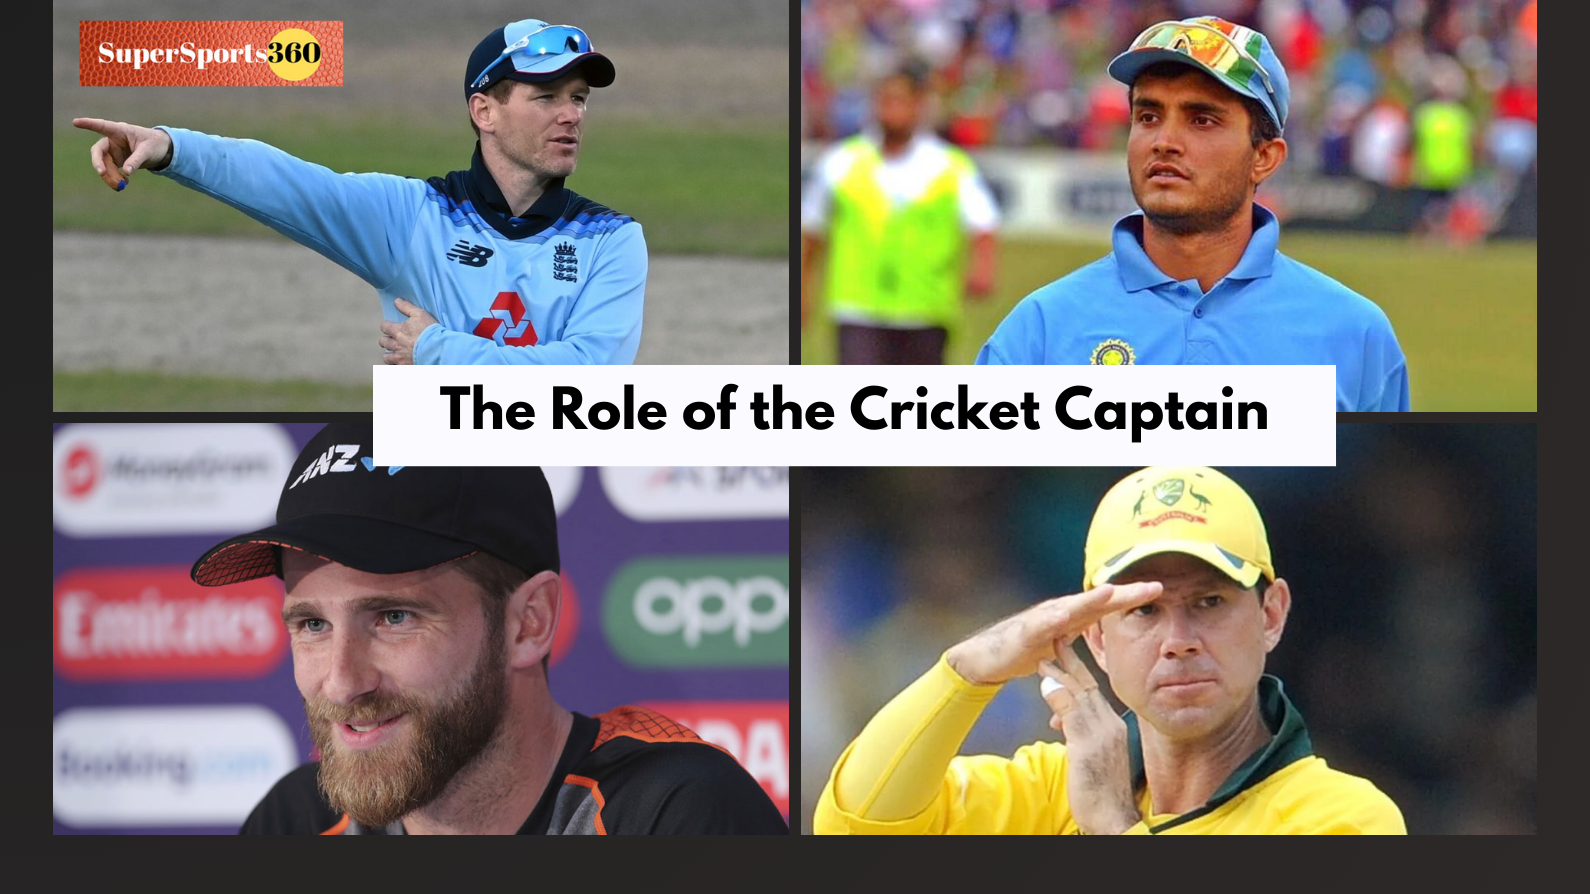 The Role of the Cricket Captain